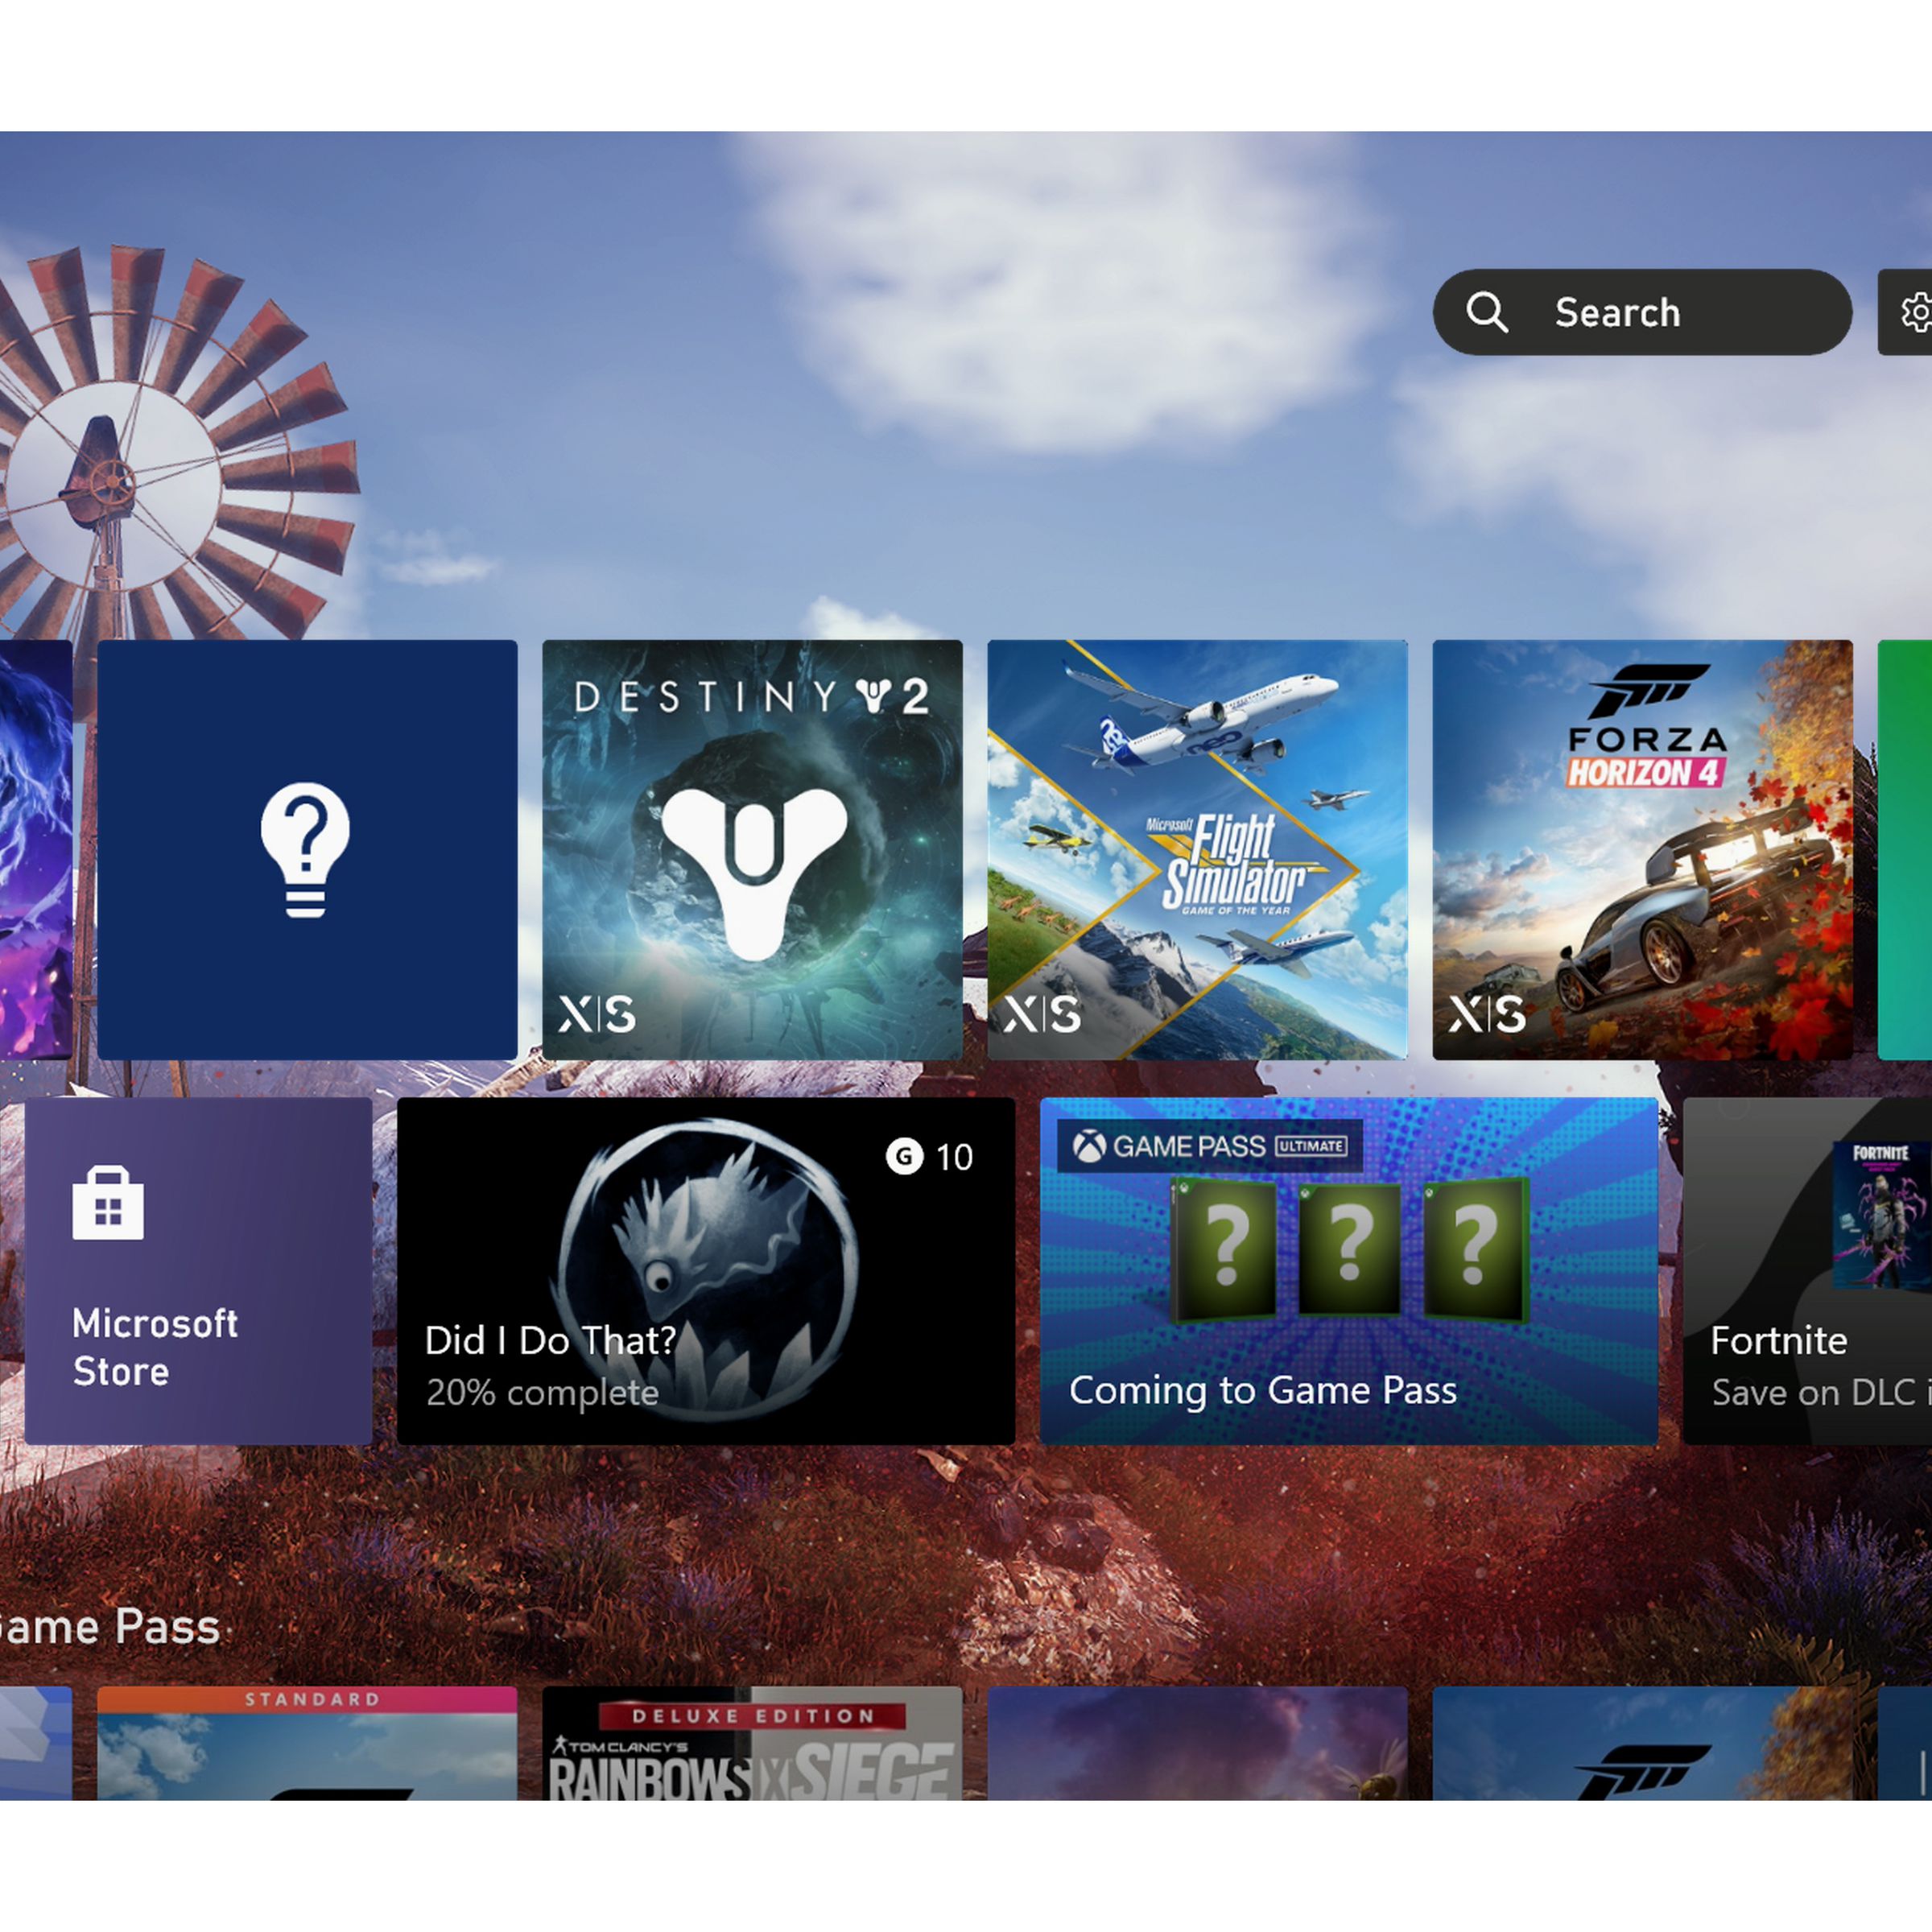 The new Xbox Home UI for 2023